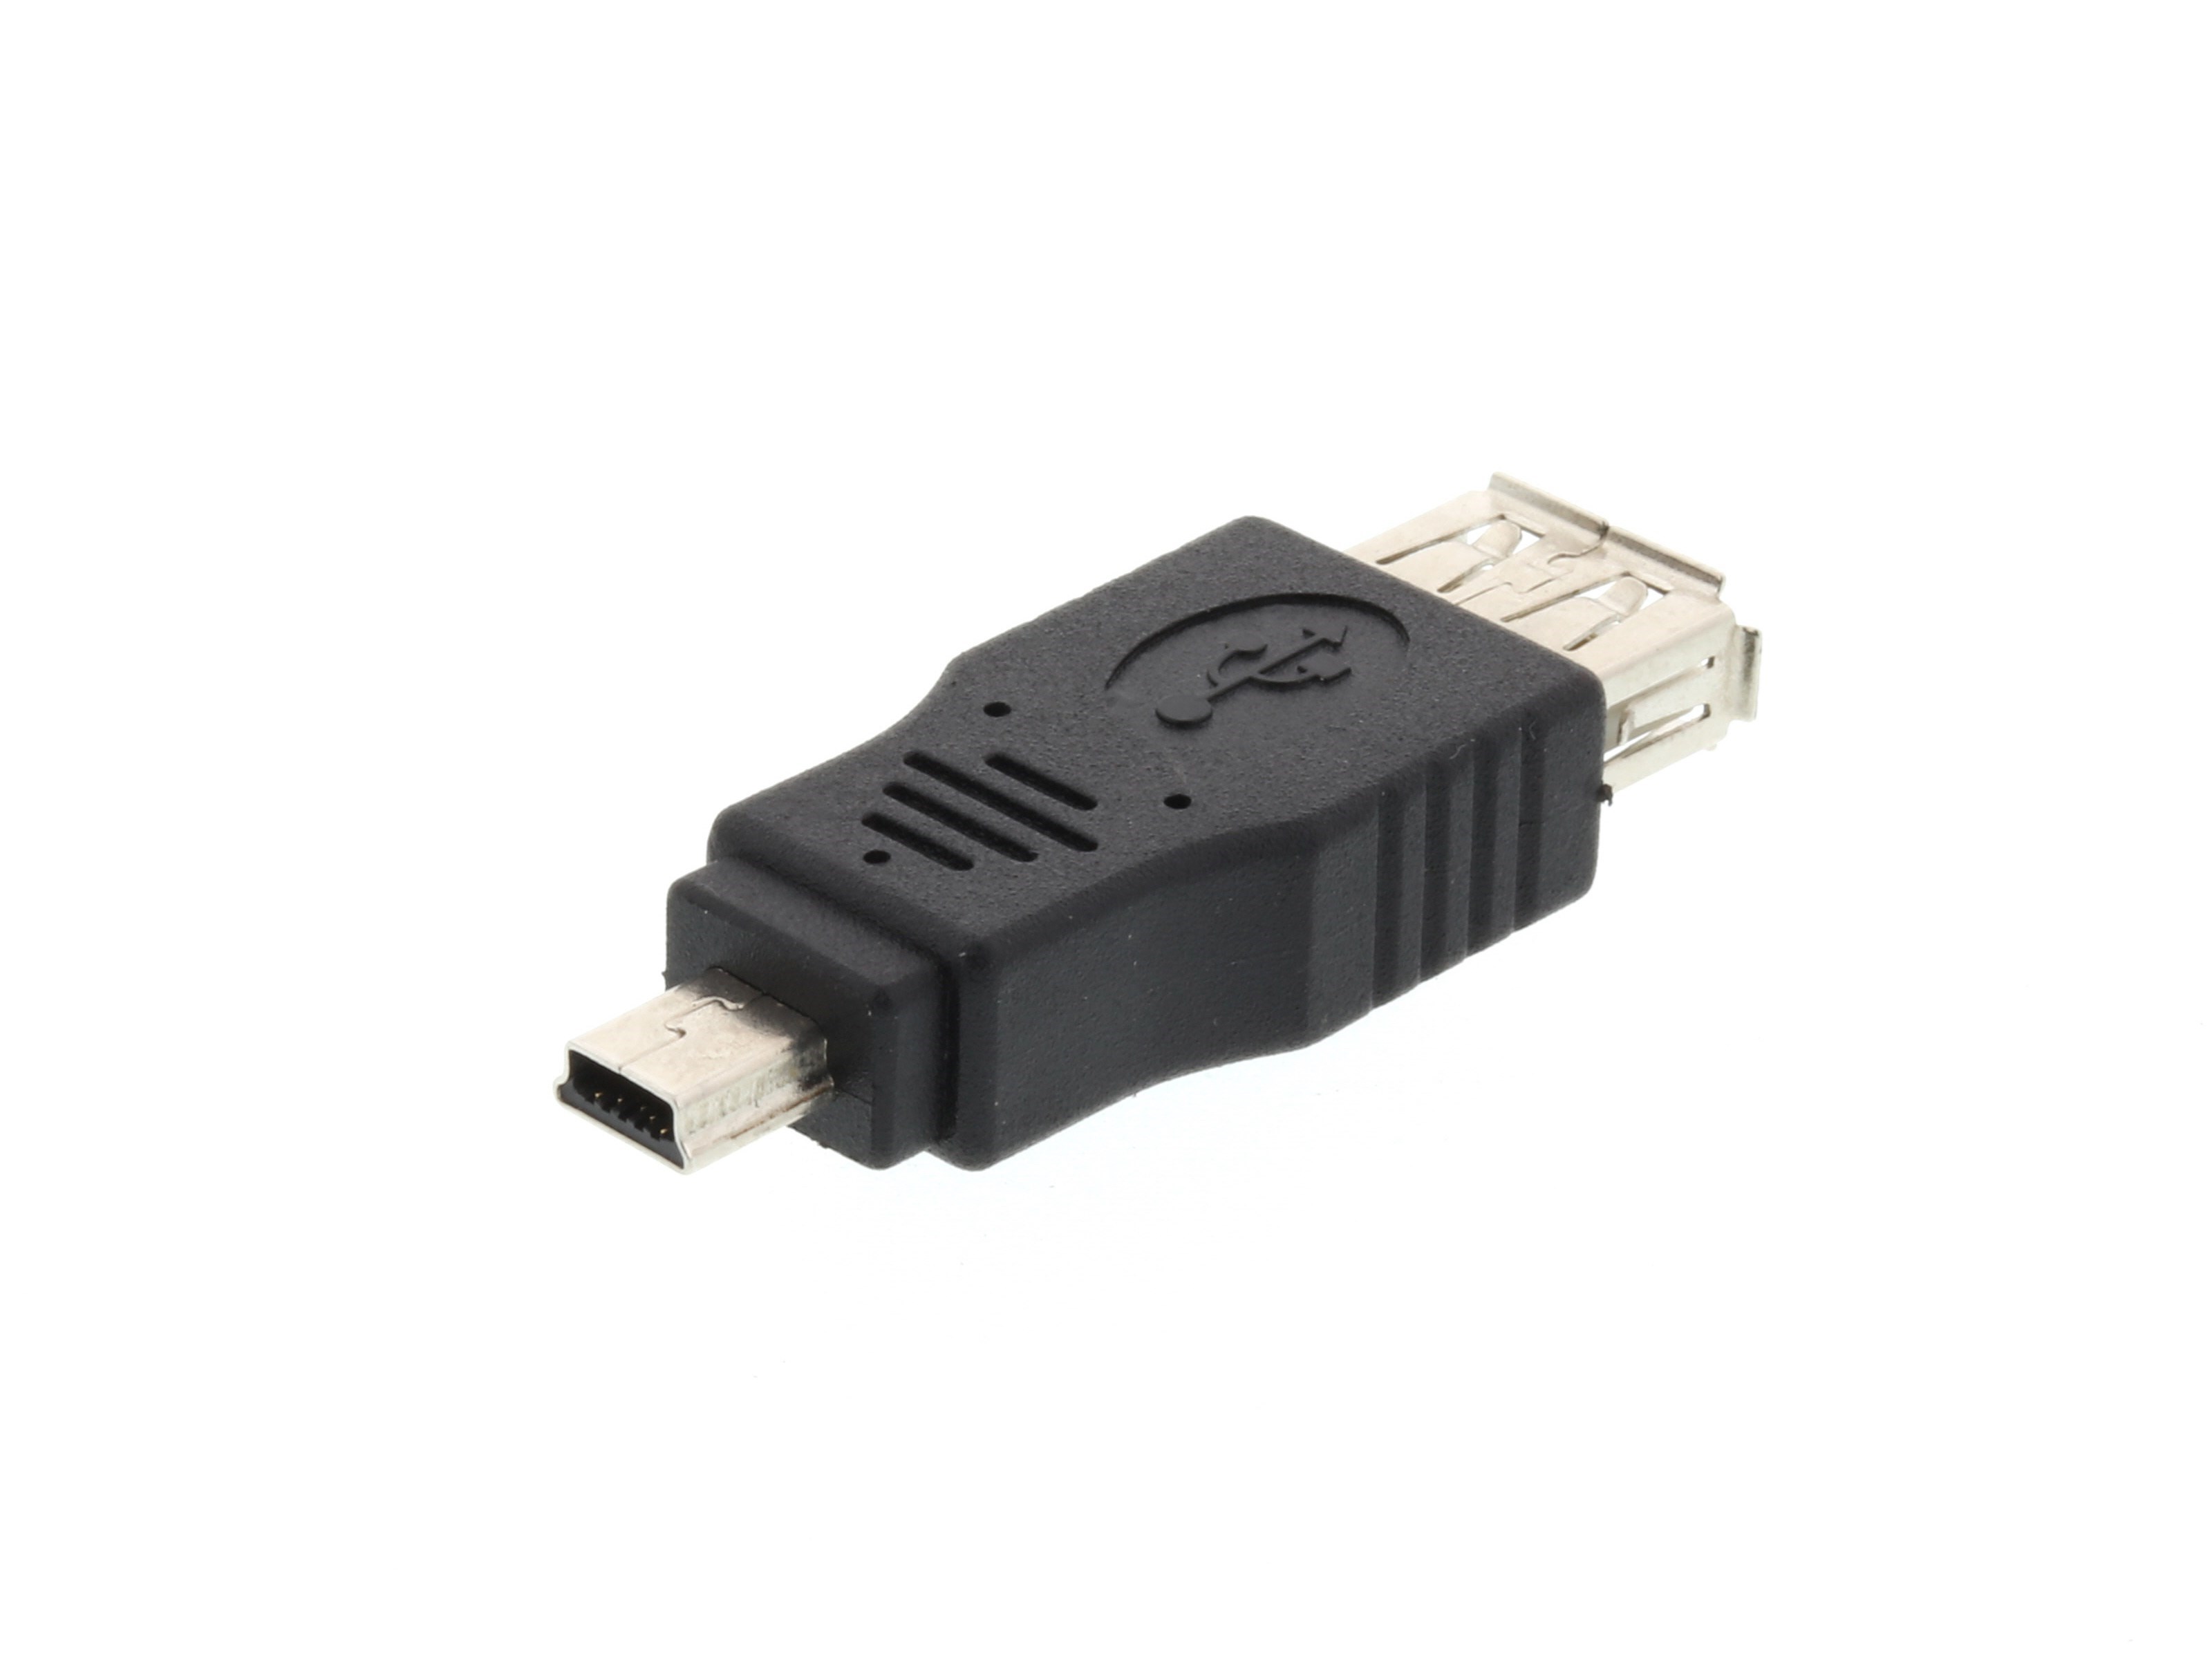 USB 2.0 Adapter - USB Female to USB Mini 5 Male 5 Pack at Cables N More